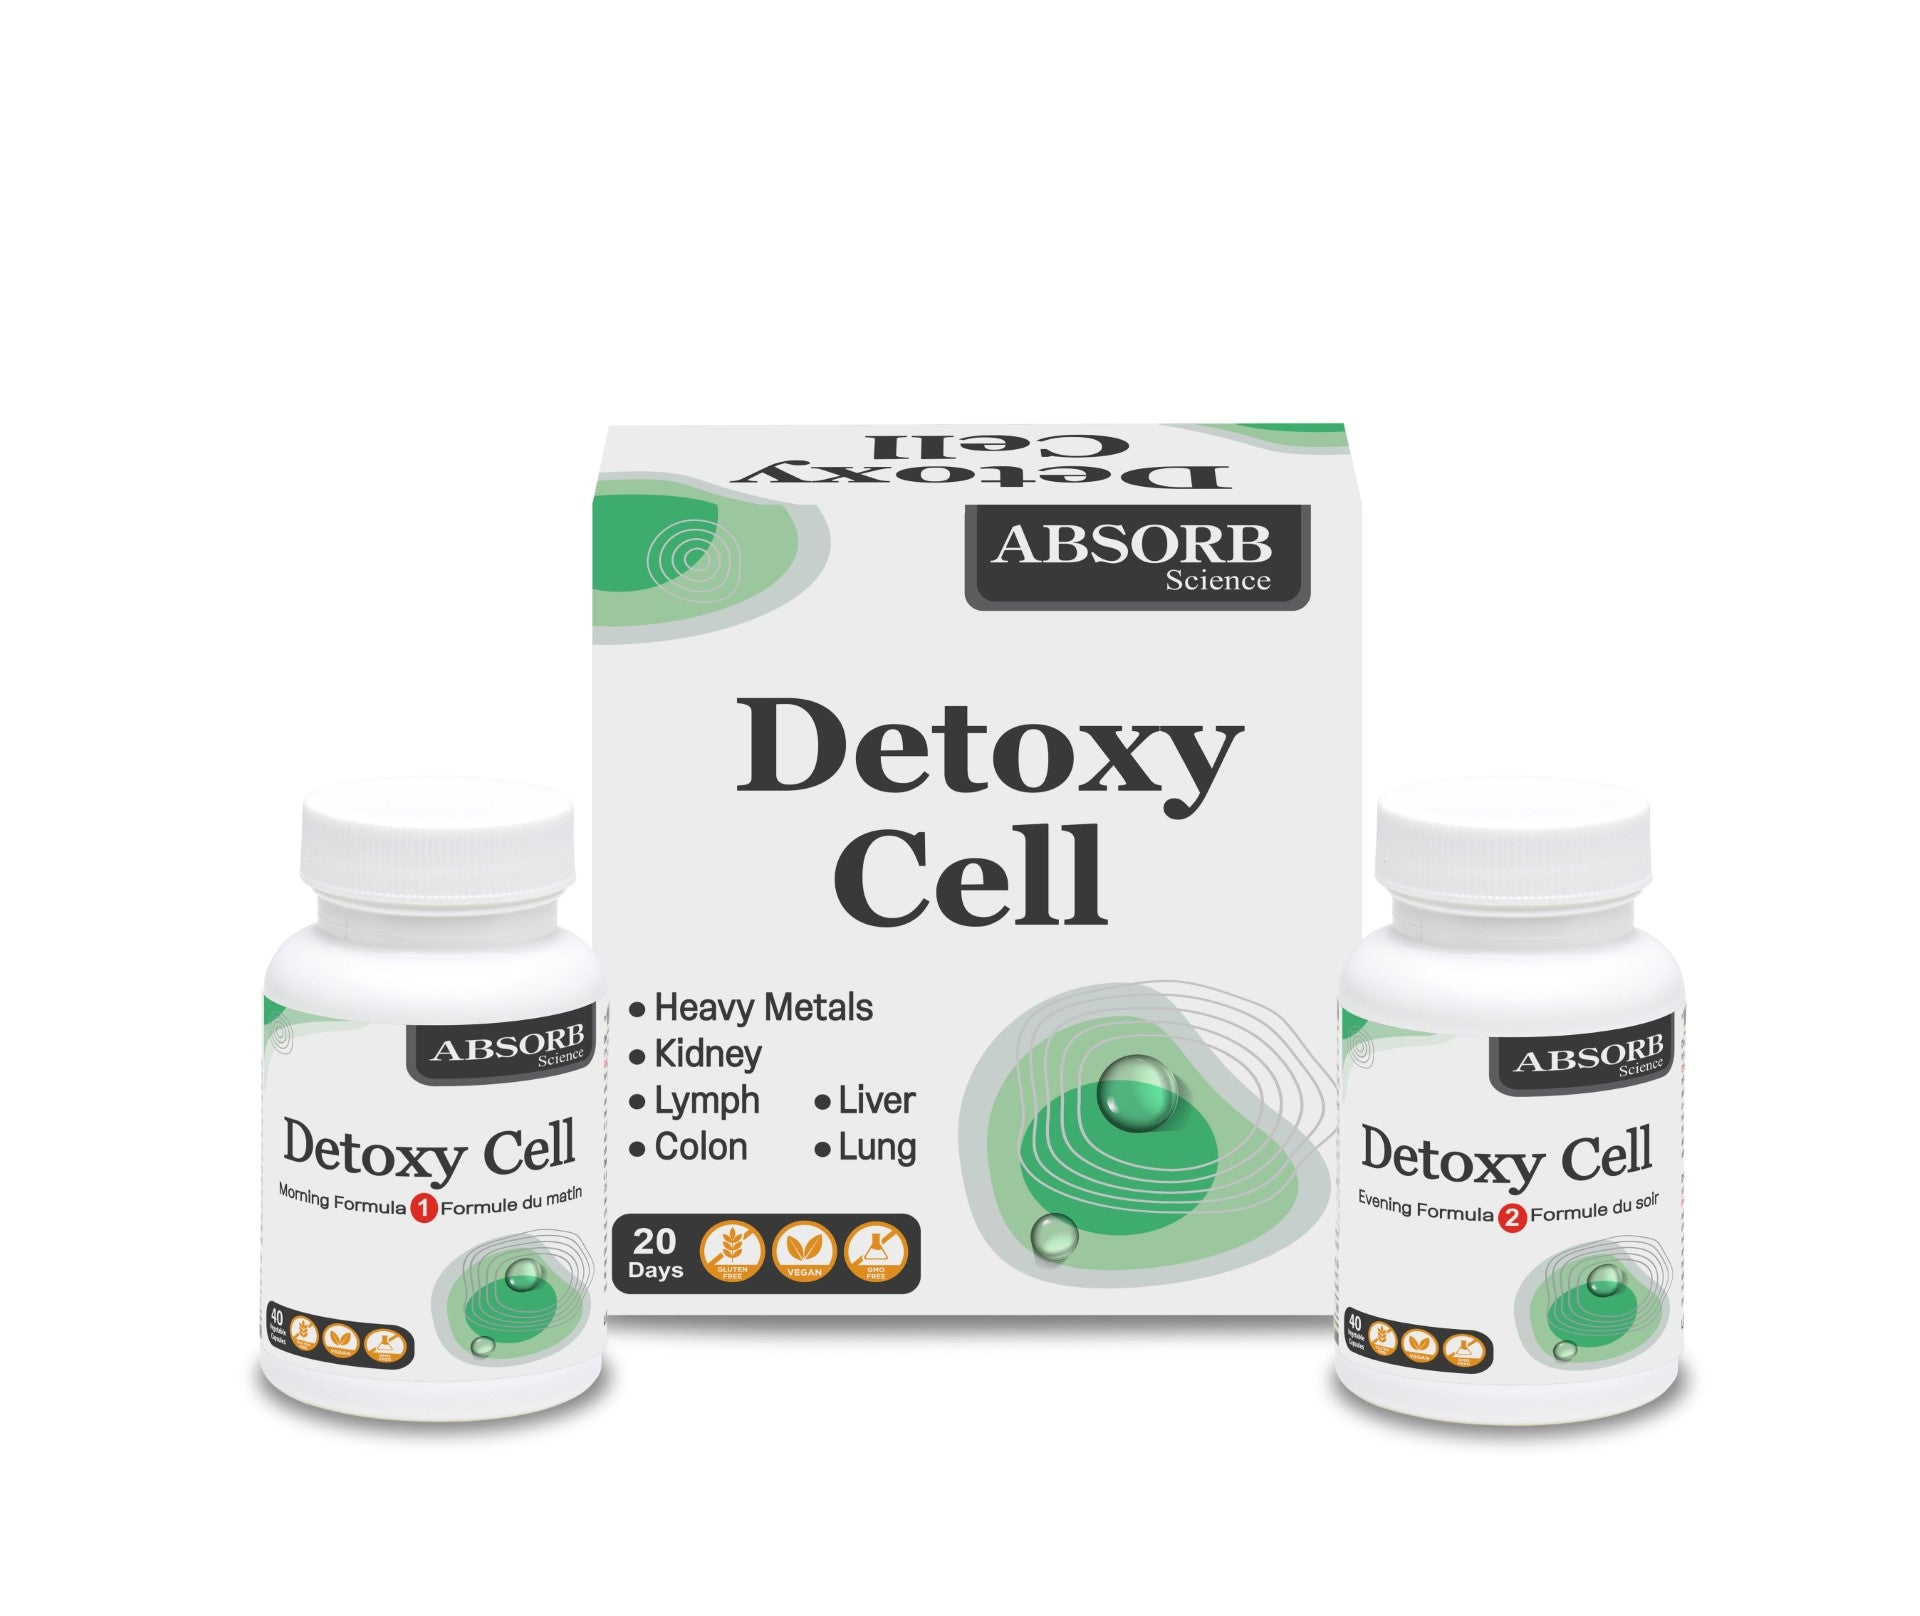 Absorb Science Detoxy Cell (20 days supply)